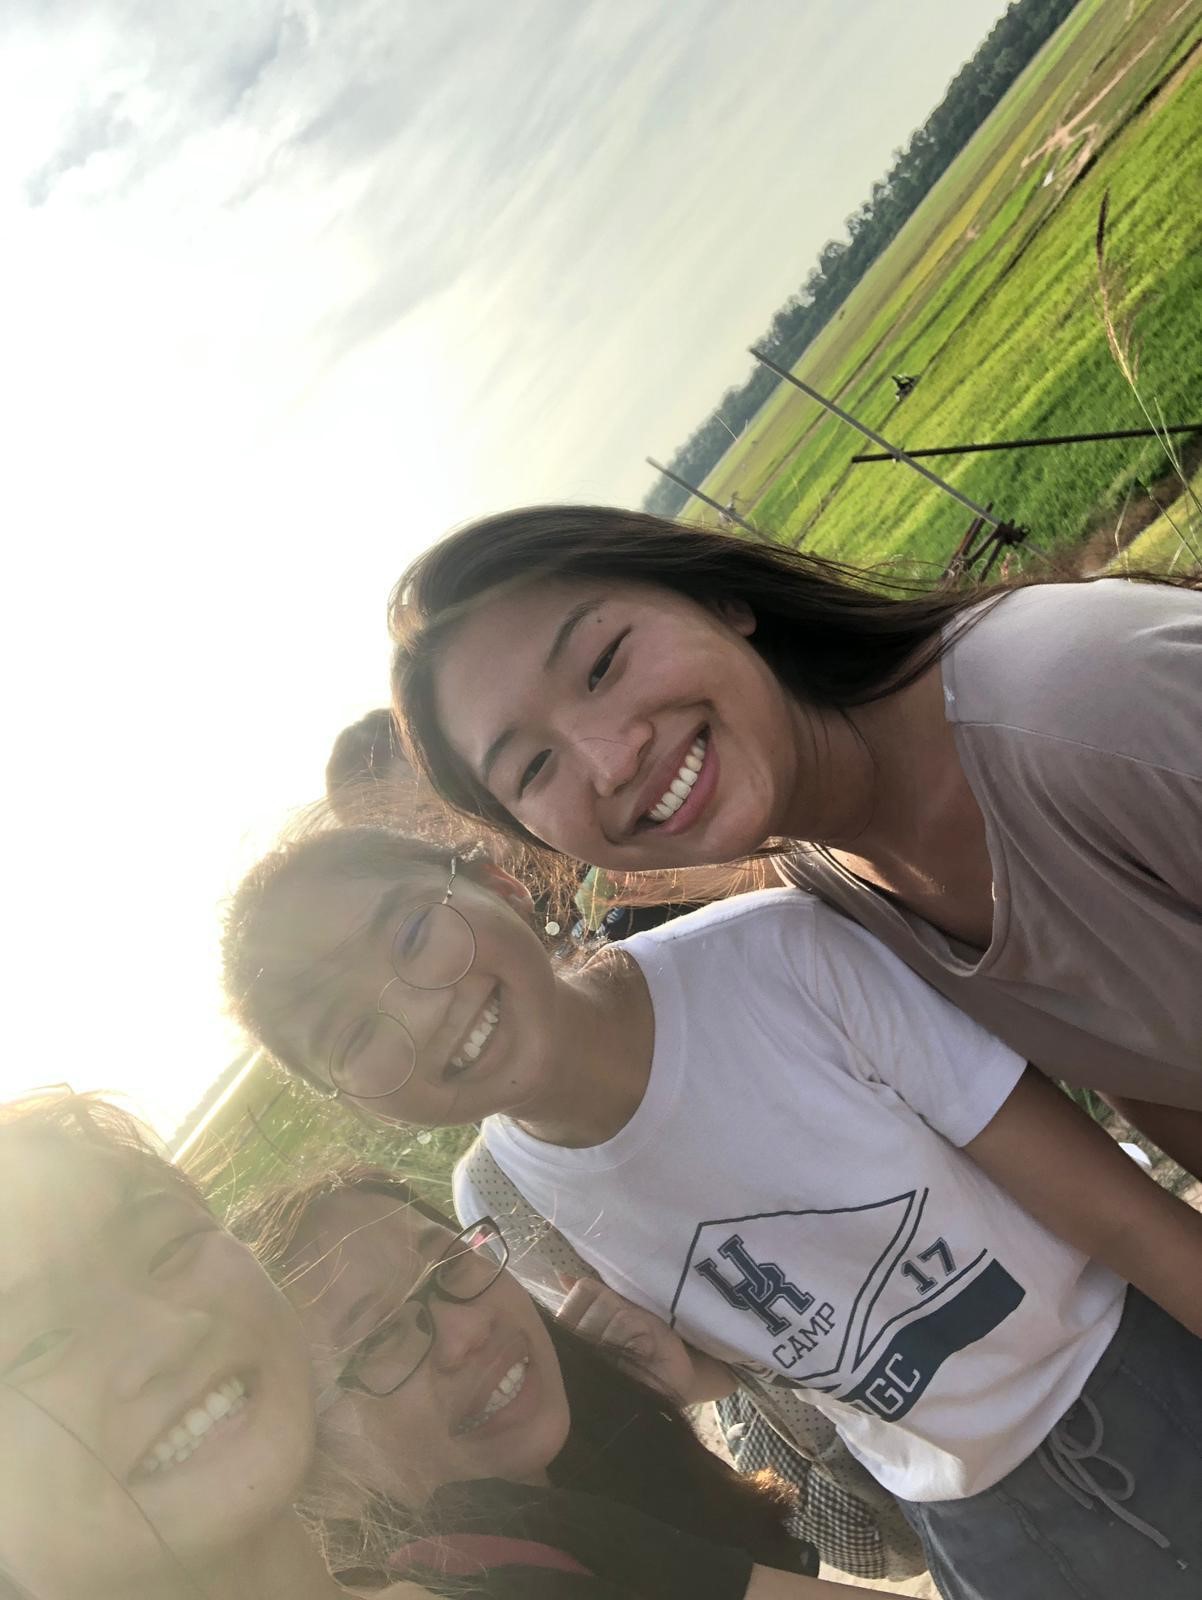 Sophia exploring nature with her new friends, Natalie from University of California Berkeley, Dr Cecilia Teng, and Danica from University of North Carolina